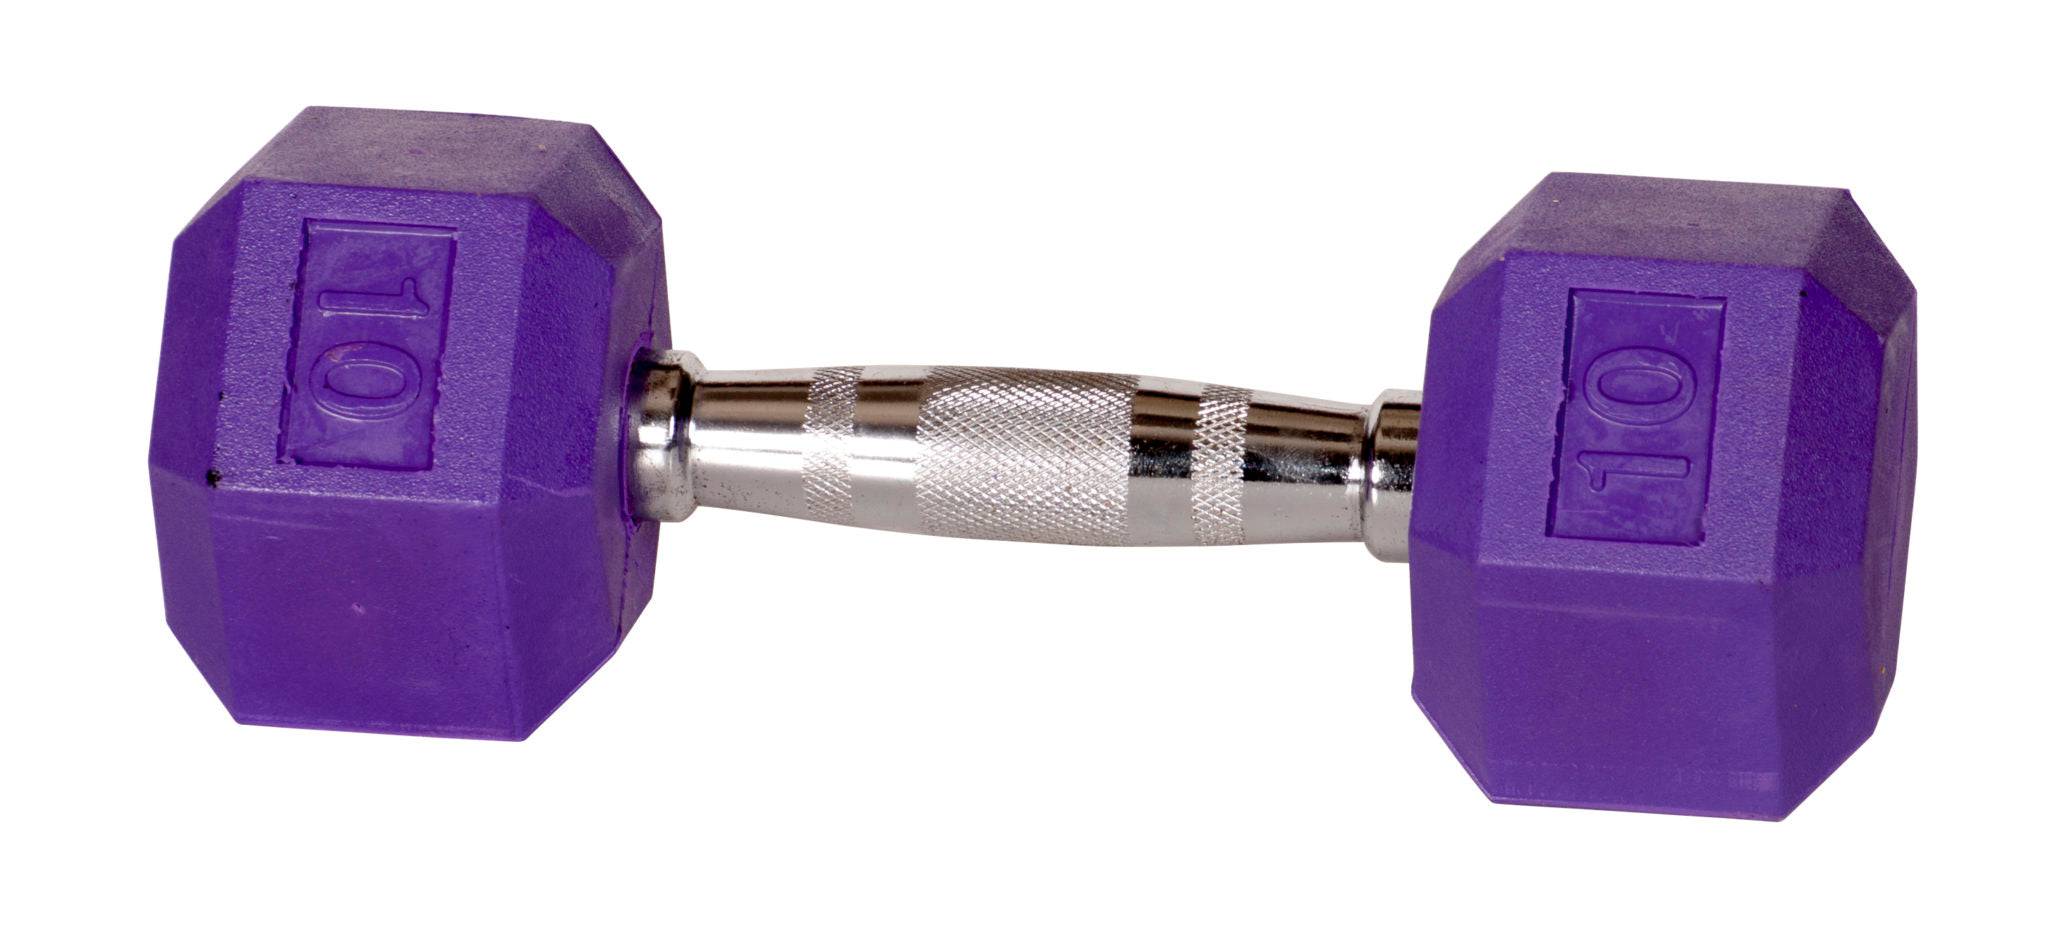 York Barbell | Dumbbells - Color Rubber Hex - XTC Fitness - Exercise Equipment Superstore - Canada - Rubber Coated Hex